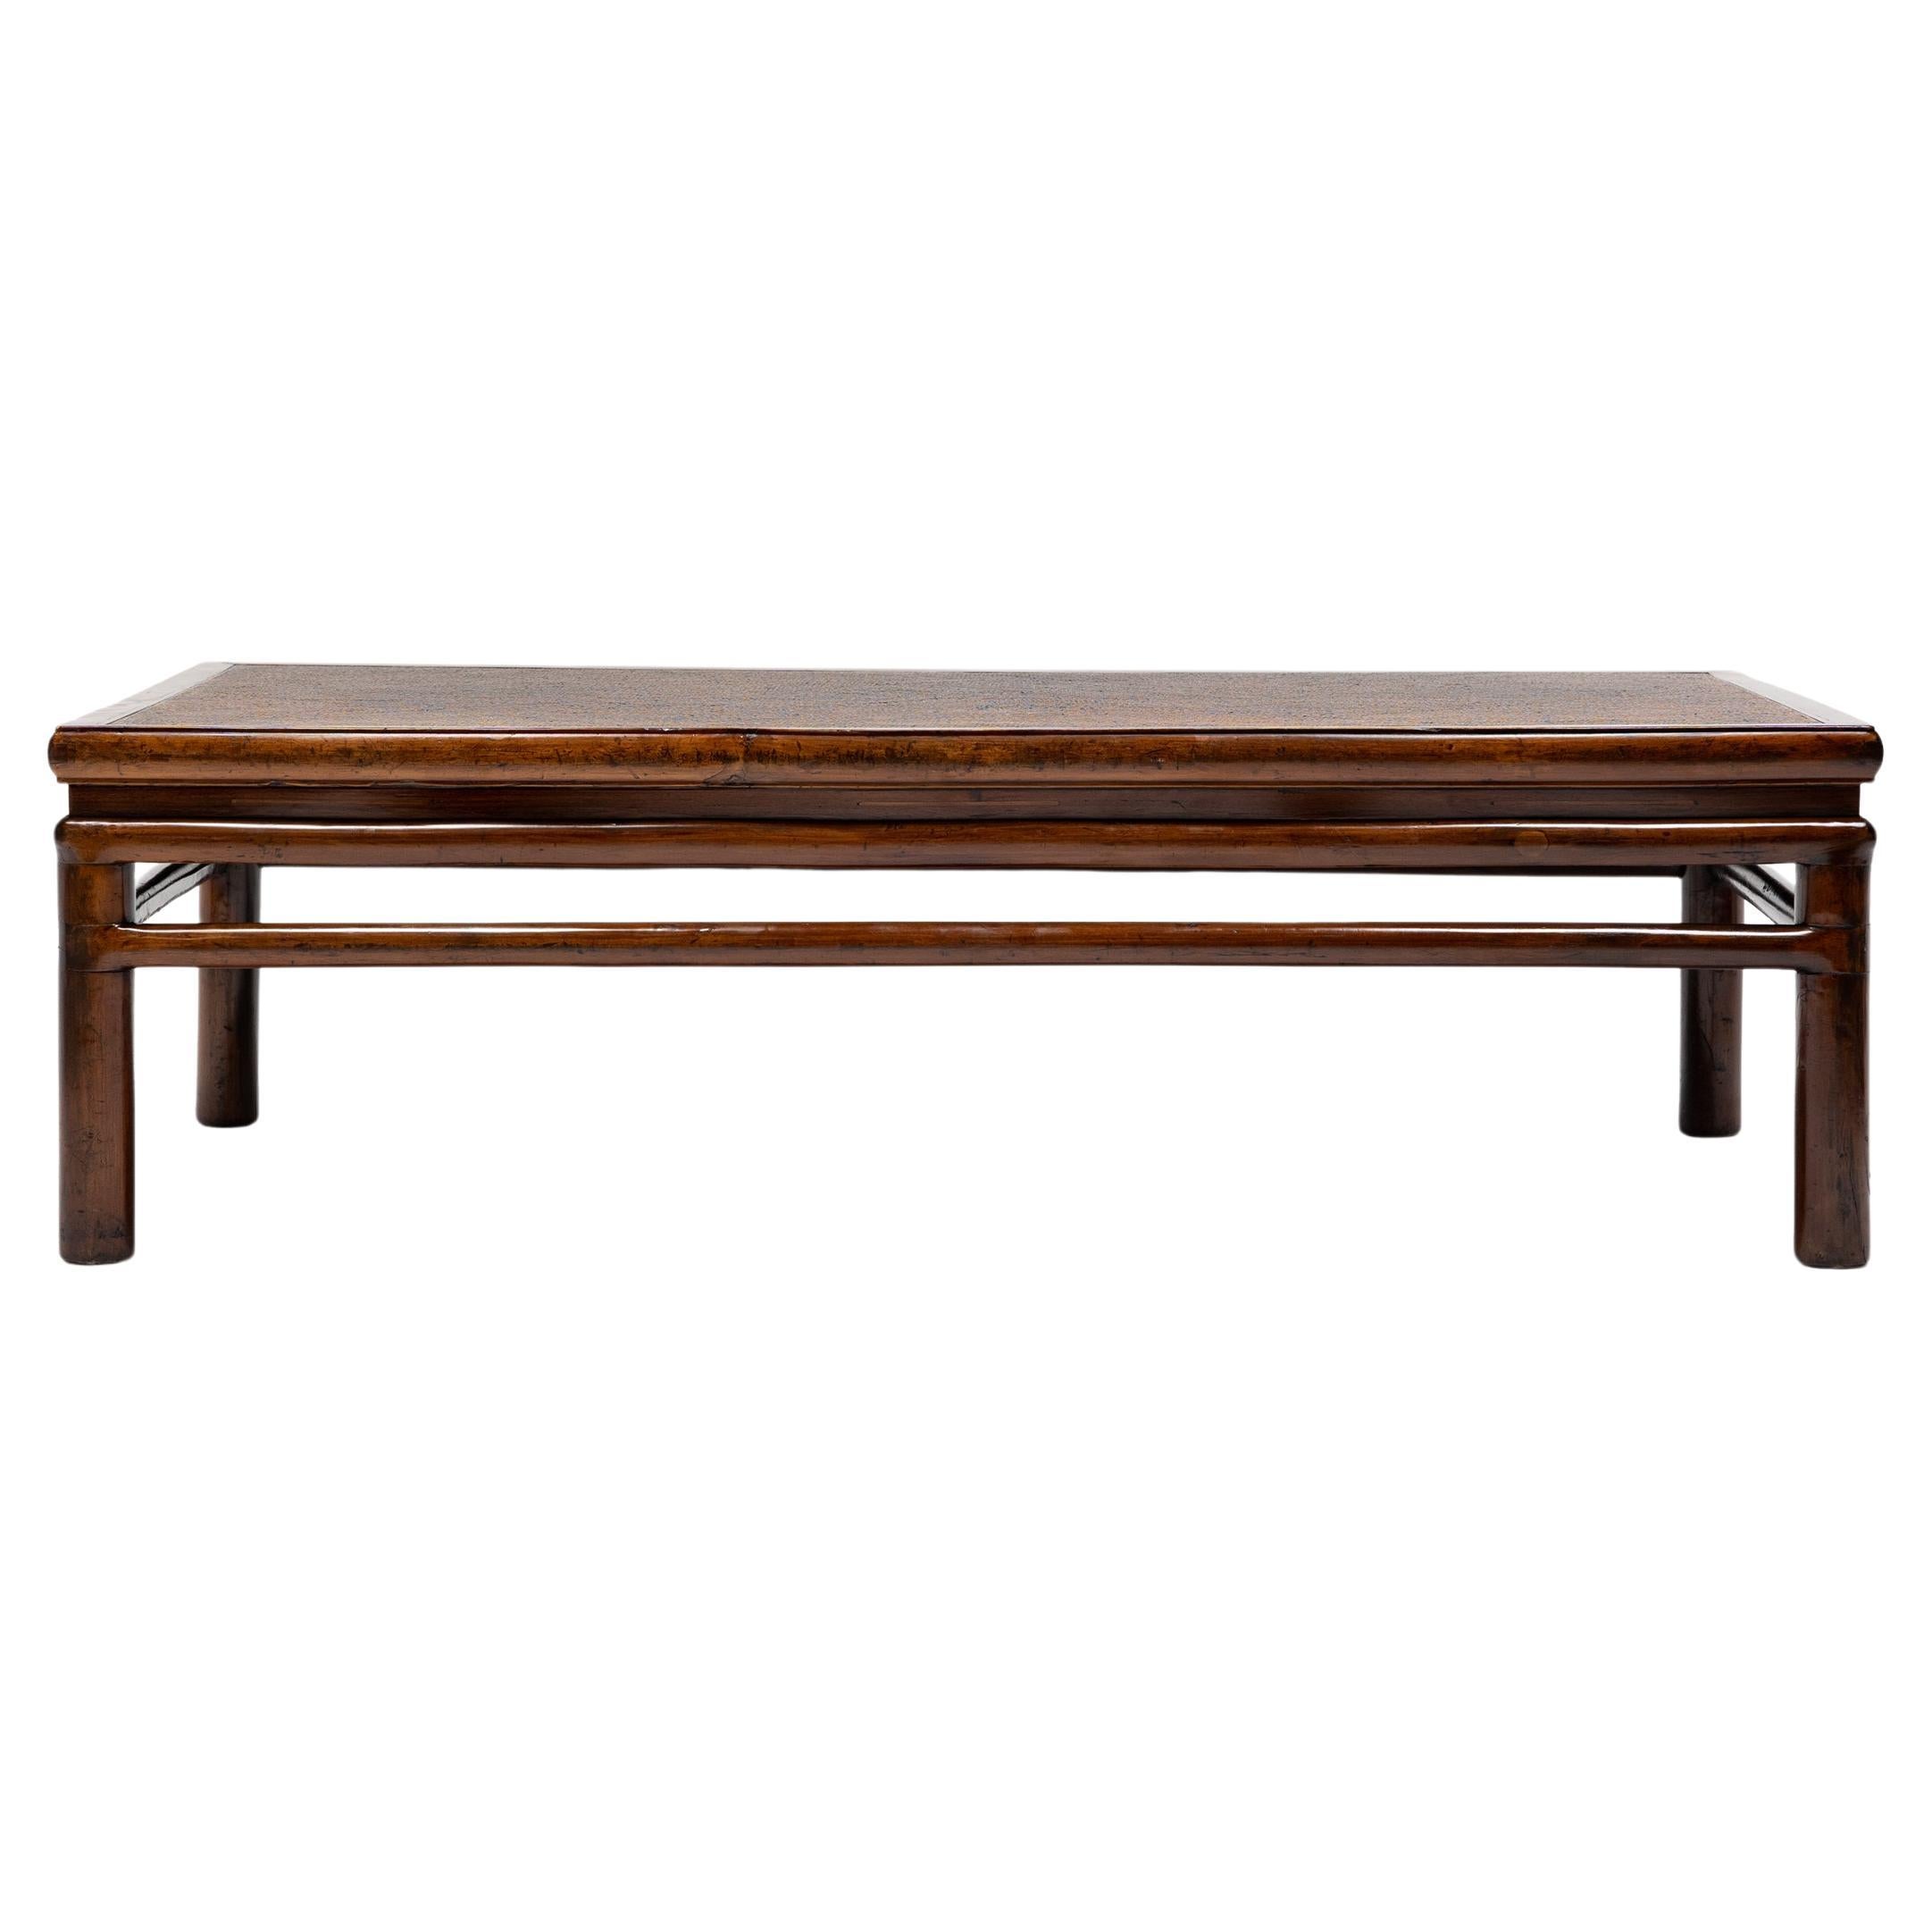 Low Woven Top Chinese Table, c. 1850